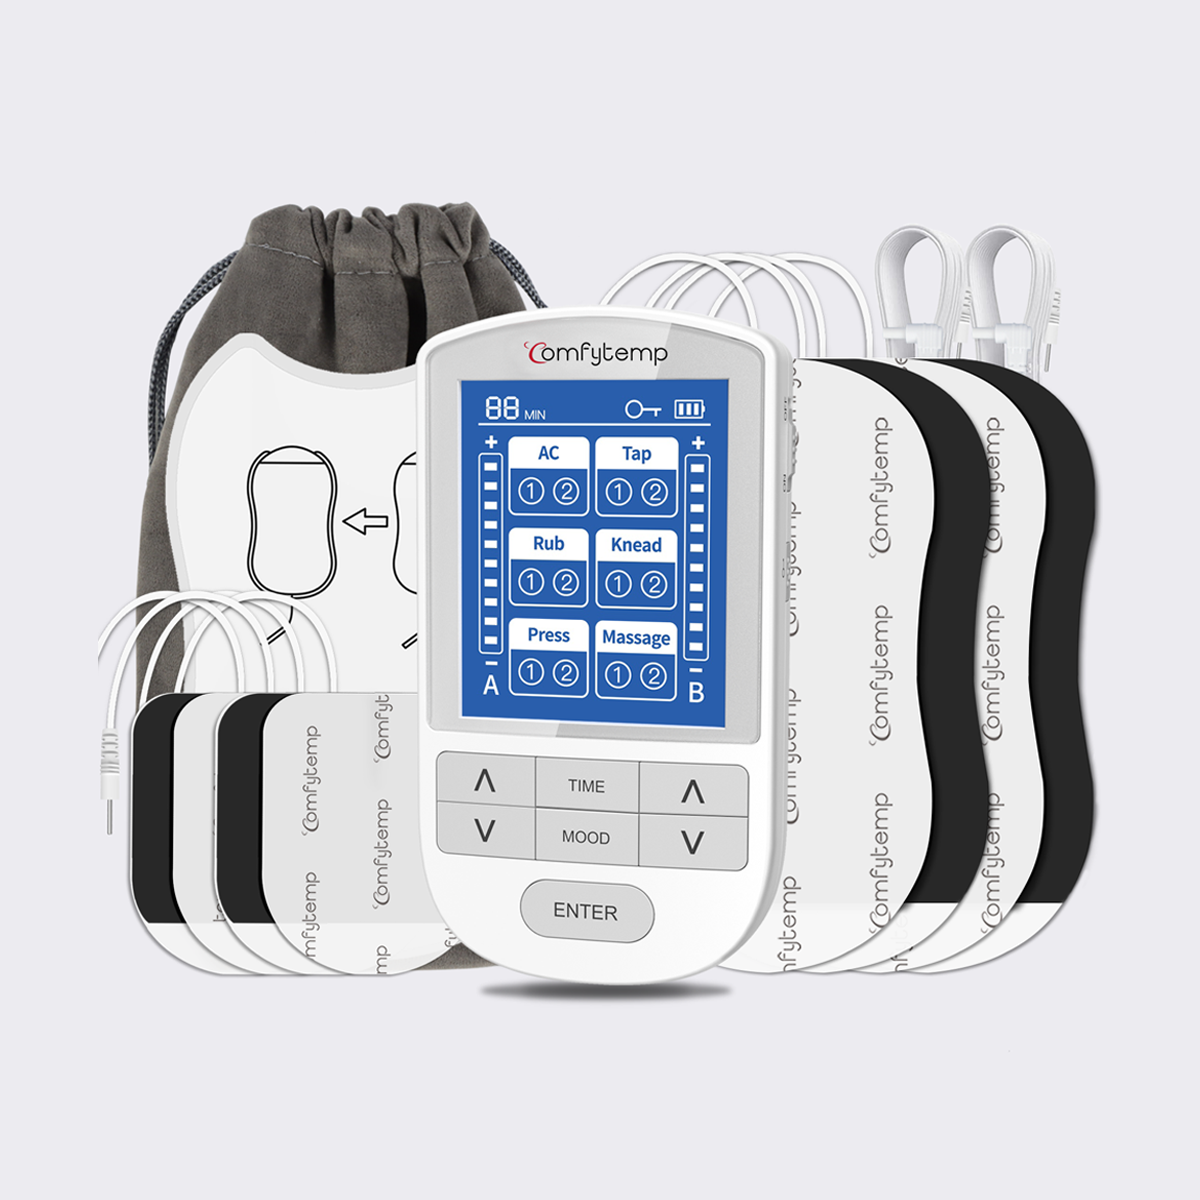 PainAway Wireless TENS Unit – Confidence First